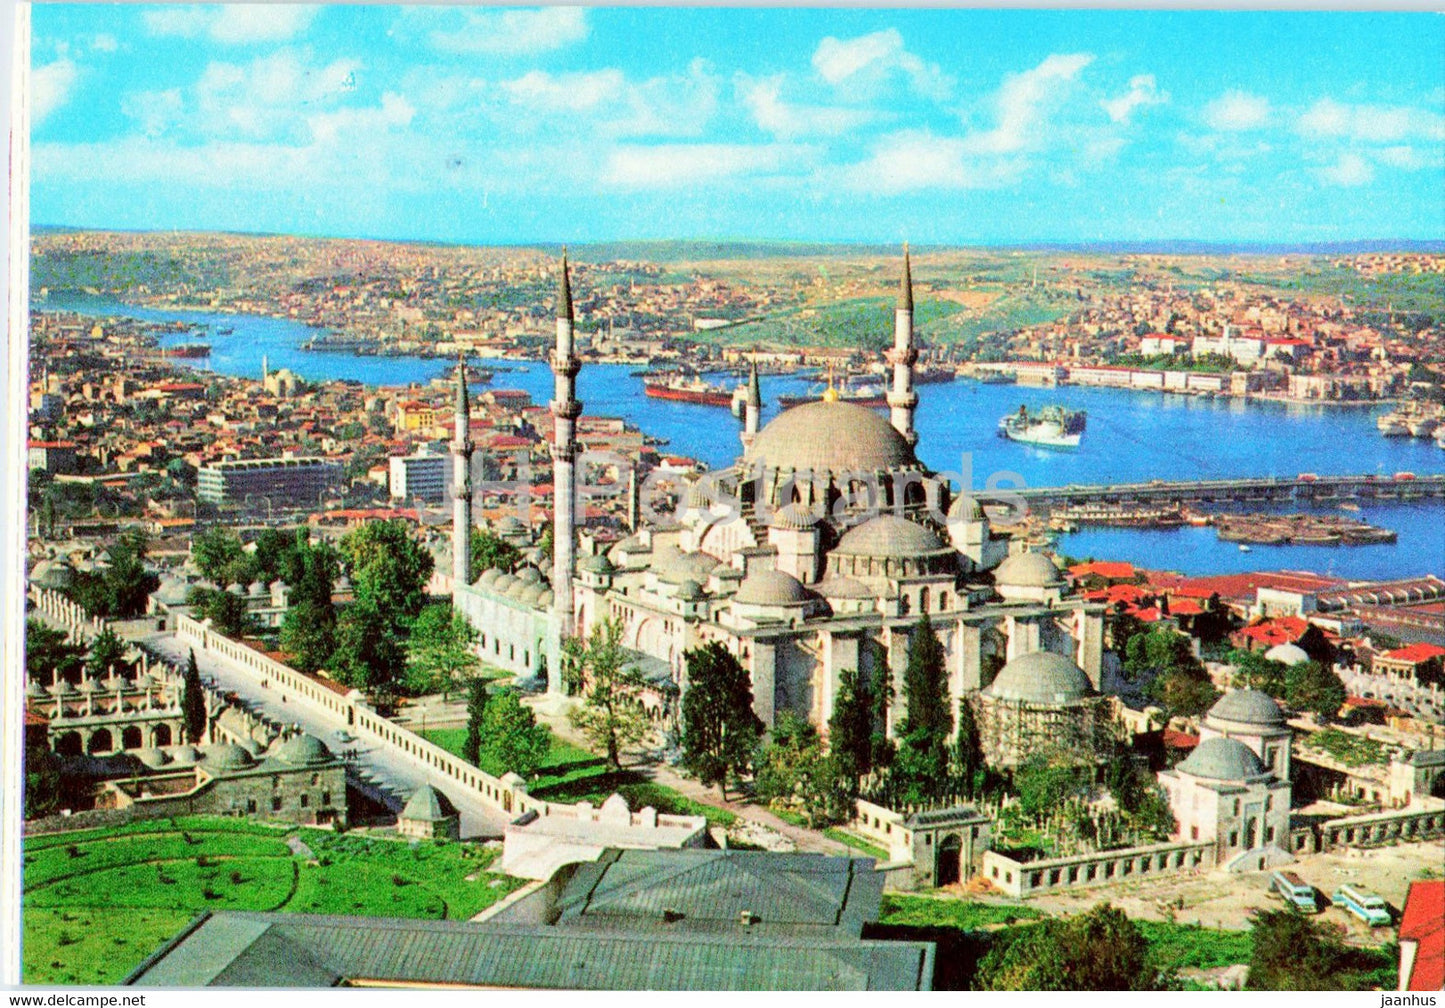 Istanbul - The Mosque of Soliman the Magnificent and the Golden Horn - Turkey - unused - JH Postcards